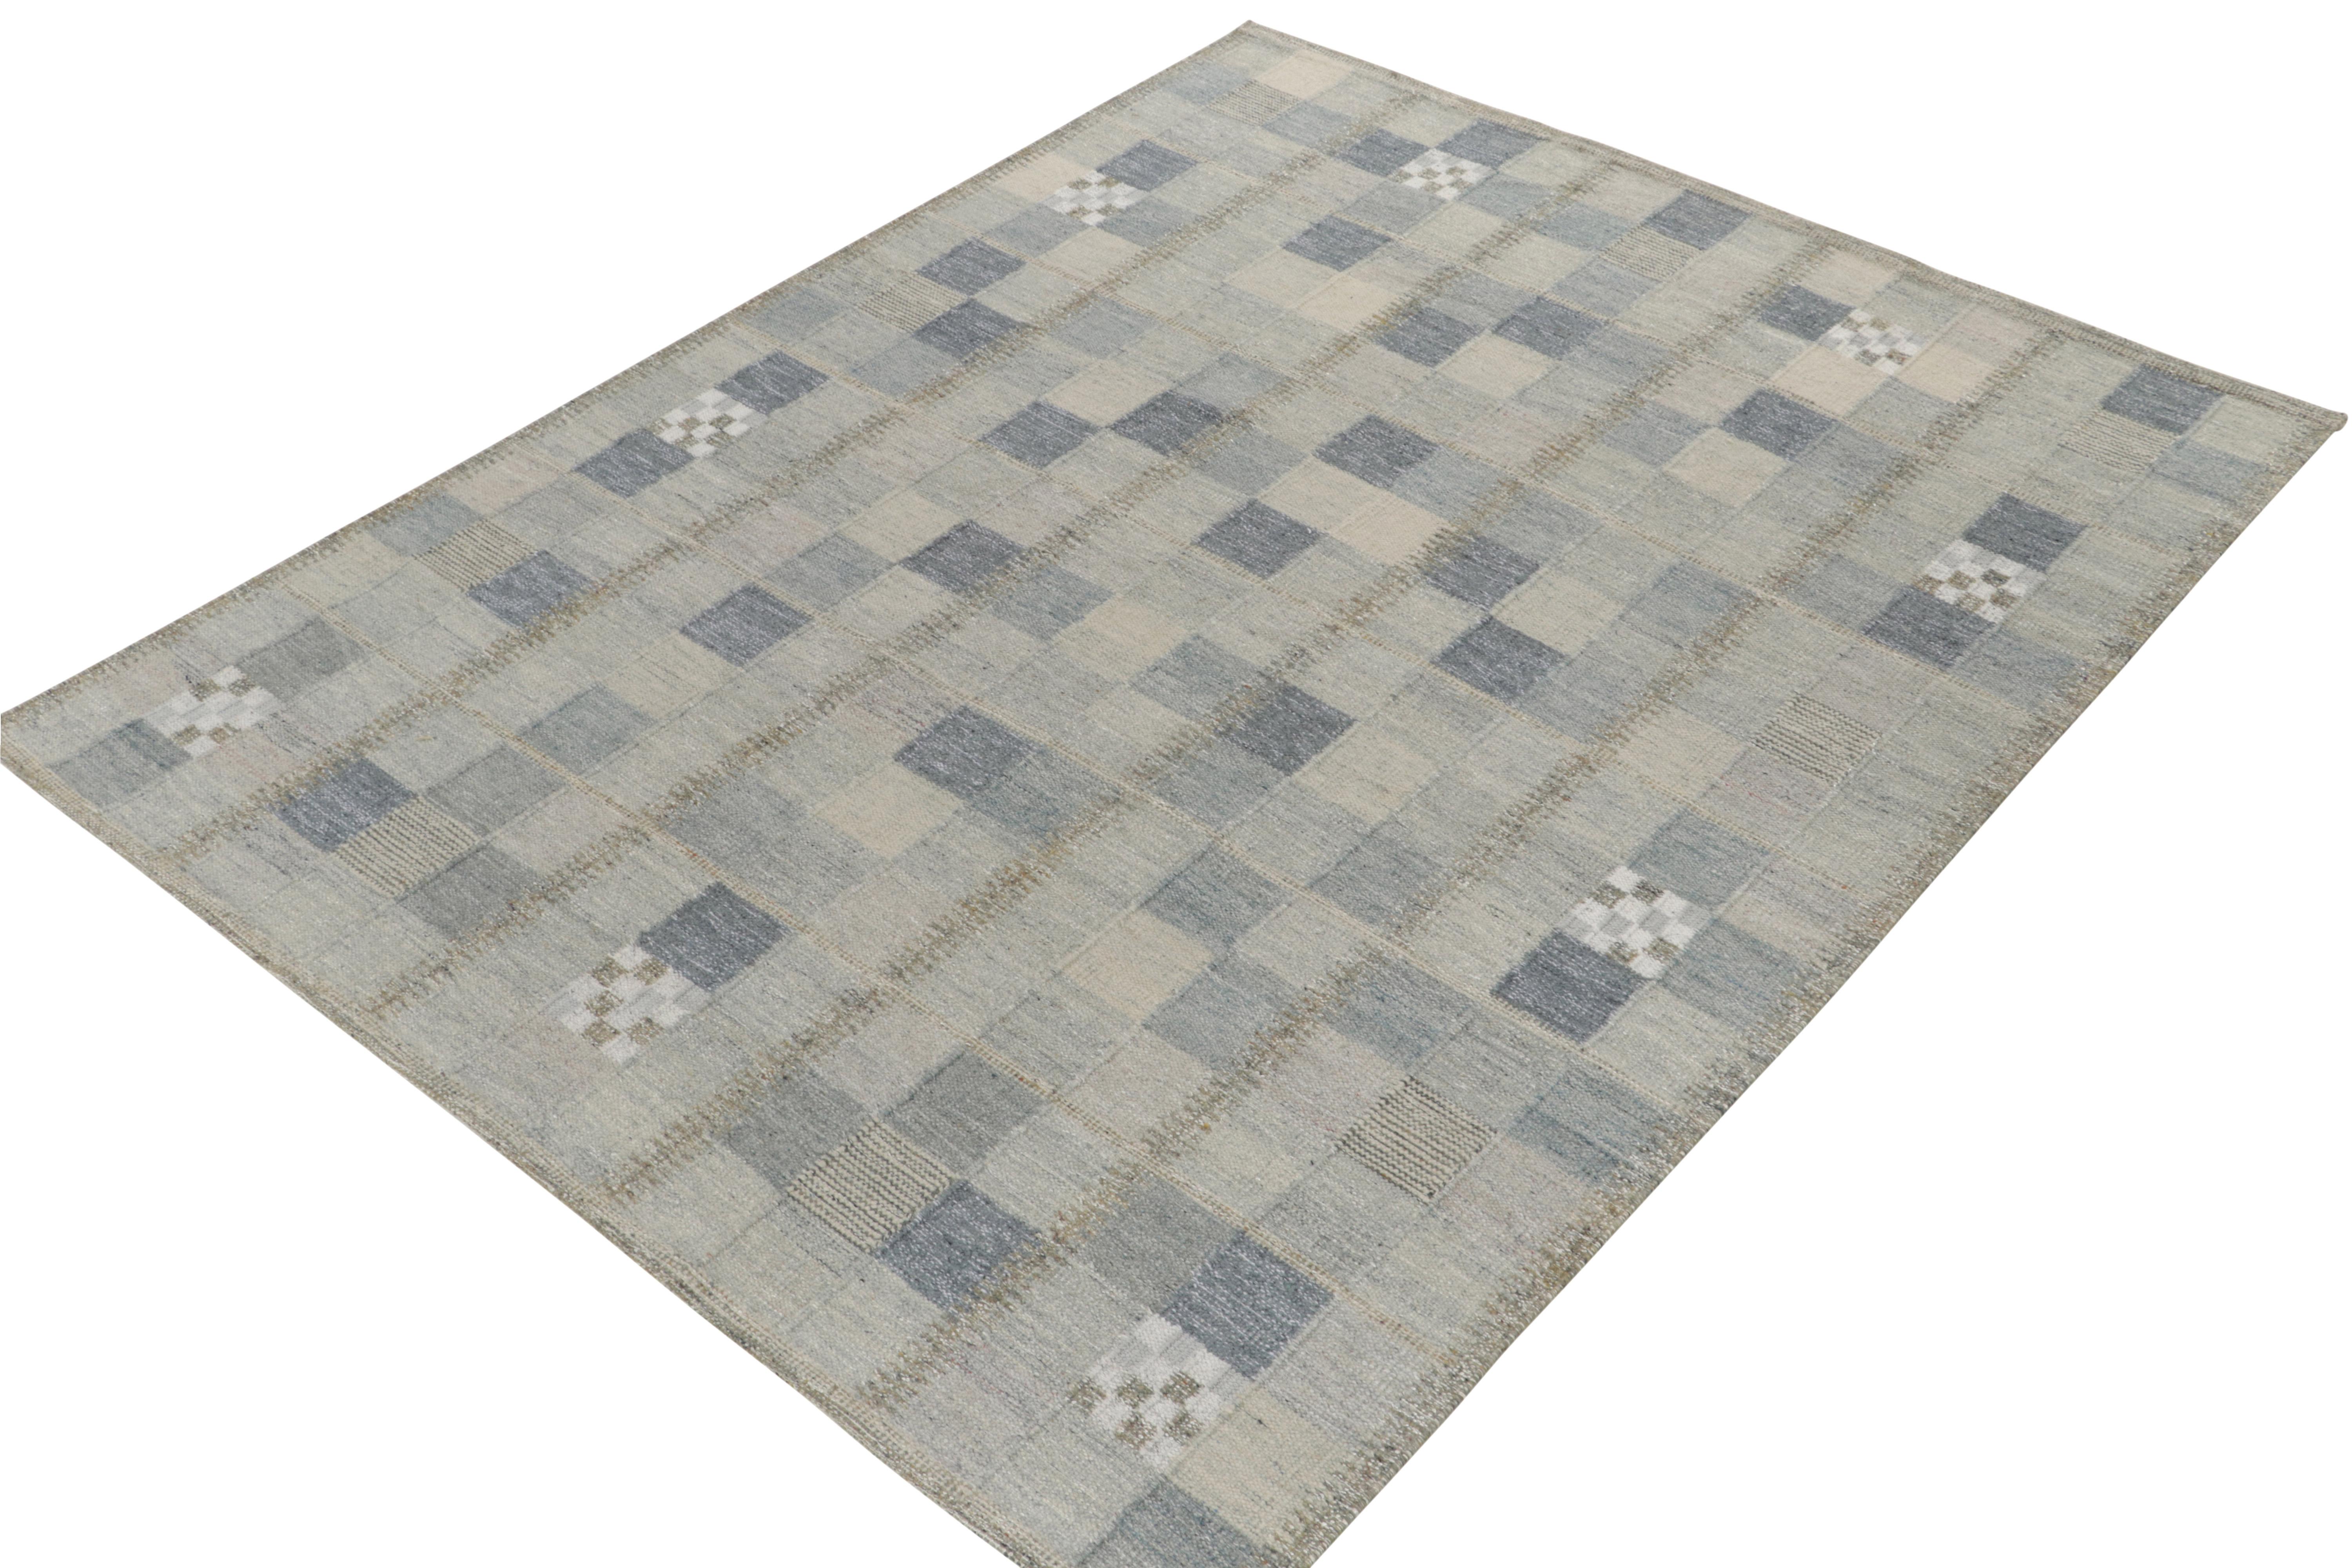 Exemplifying a modern take on Swedish styles, a 10x14 flat weave from Rug & Kilim’s award-winning Scandinavian Kilim collection. The handwoven rug enjoys a smart application of geometry with well defined compartmentalisation entwining variegated